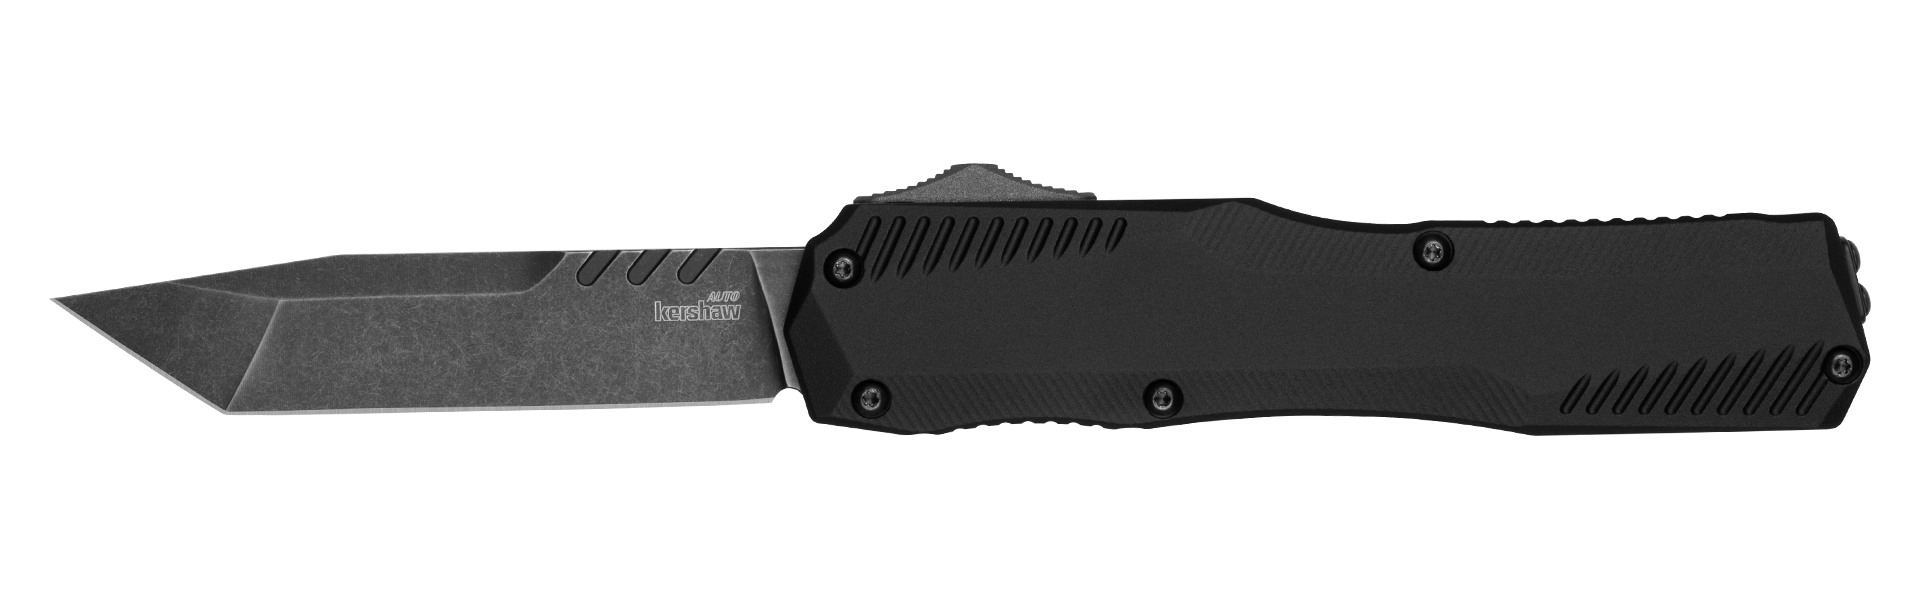 Kershaw 9000T Matt Diskin Livewire OTF Auto Knife 3.3" CPM-MagnaCut BlackWashed Tanto from NORTH RIVER OUTDOORS